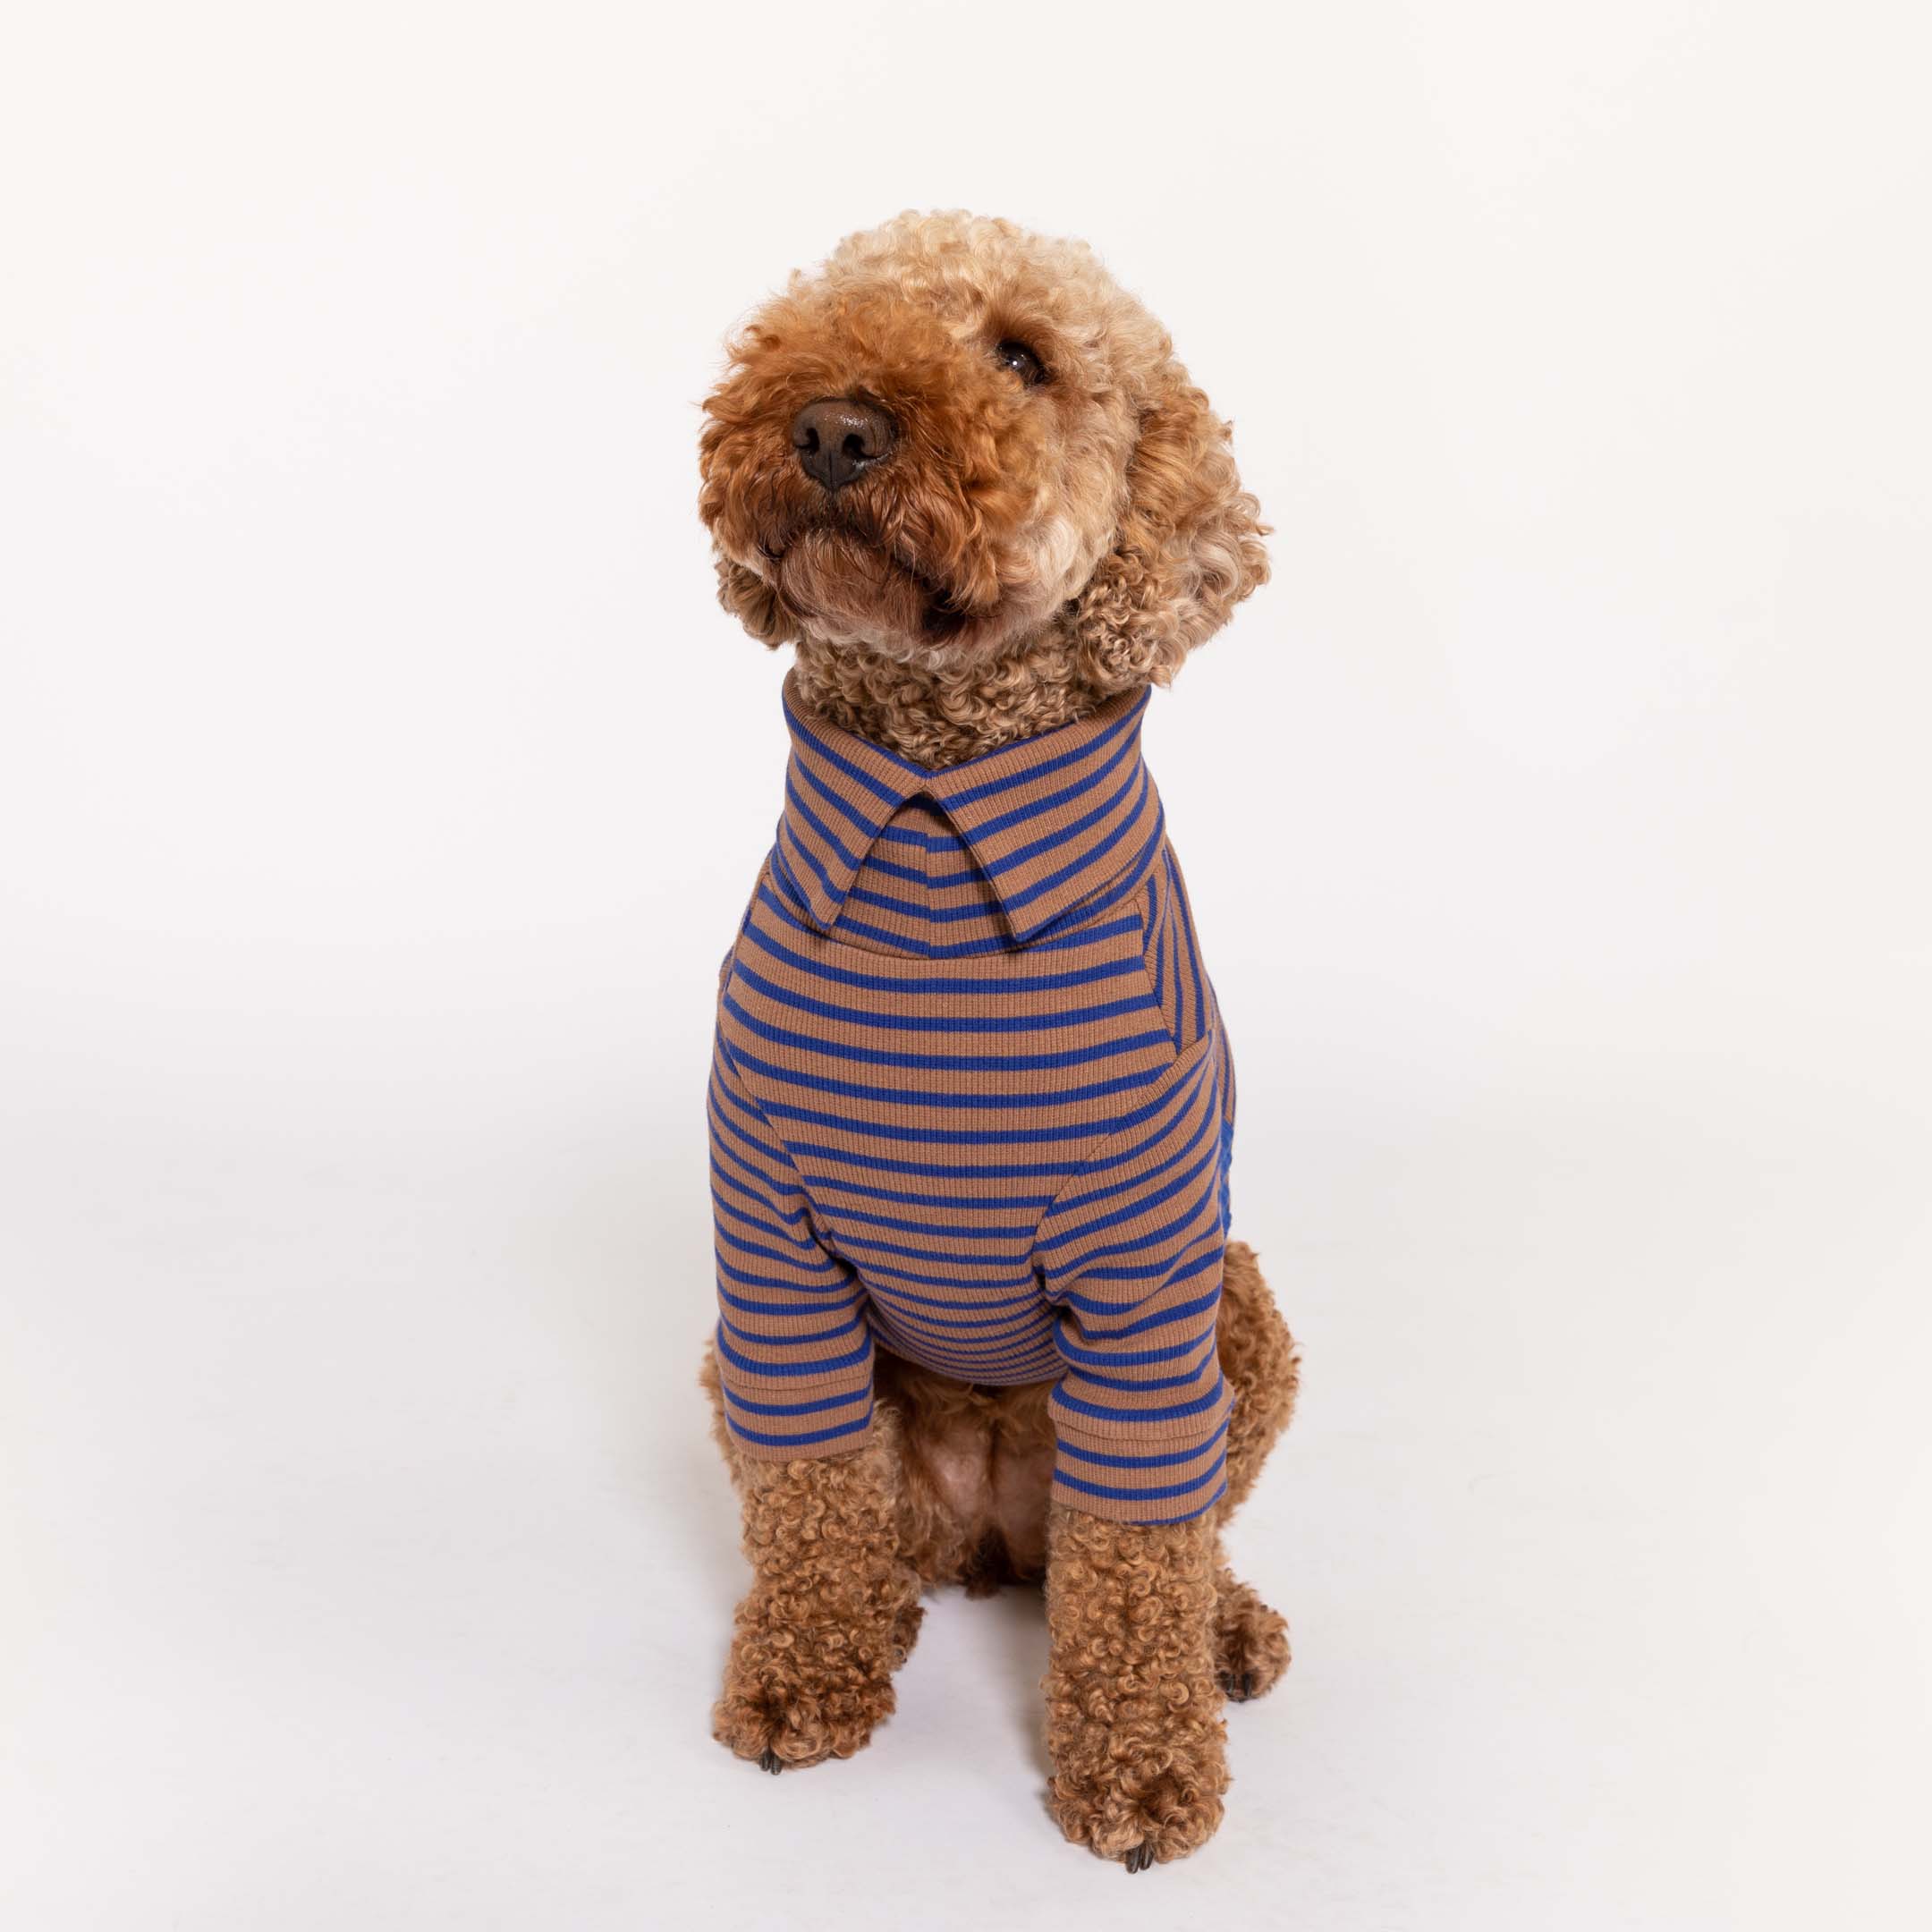 Curious Poodle in a cozy Cobalt and Brown striped turtleneck shirt, showcasing the latest in canine fashion trends.